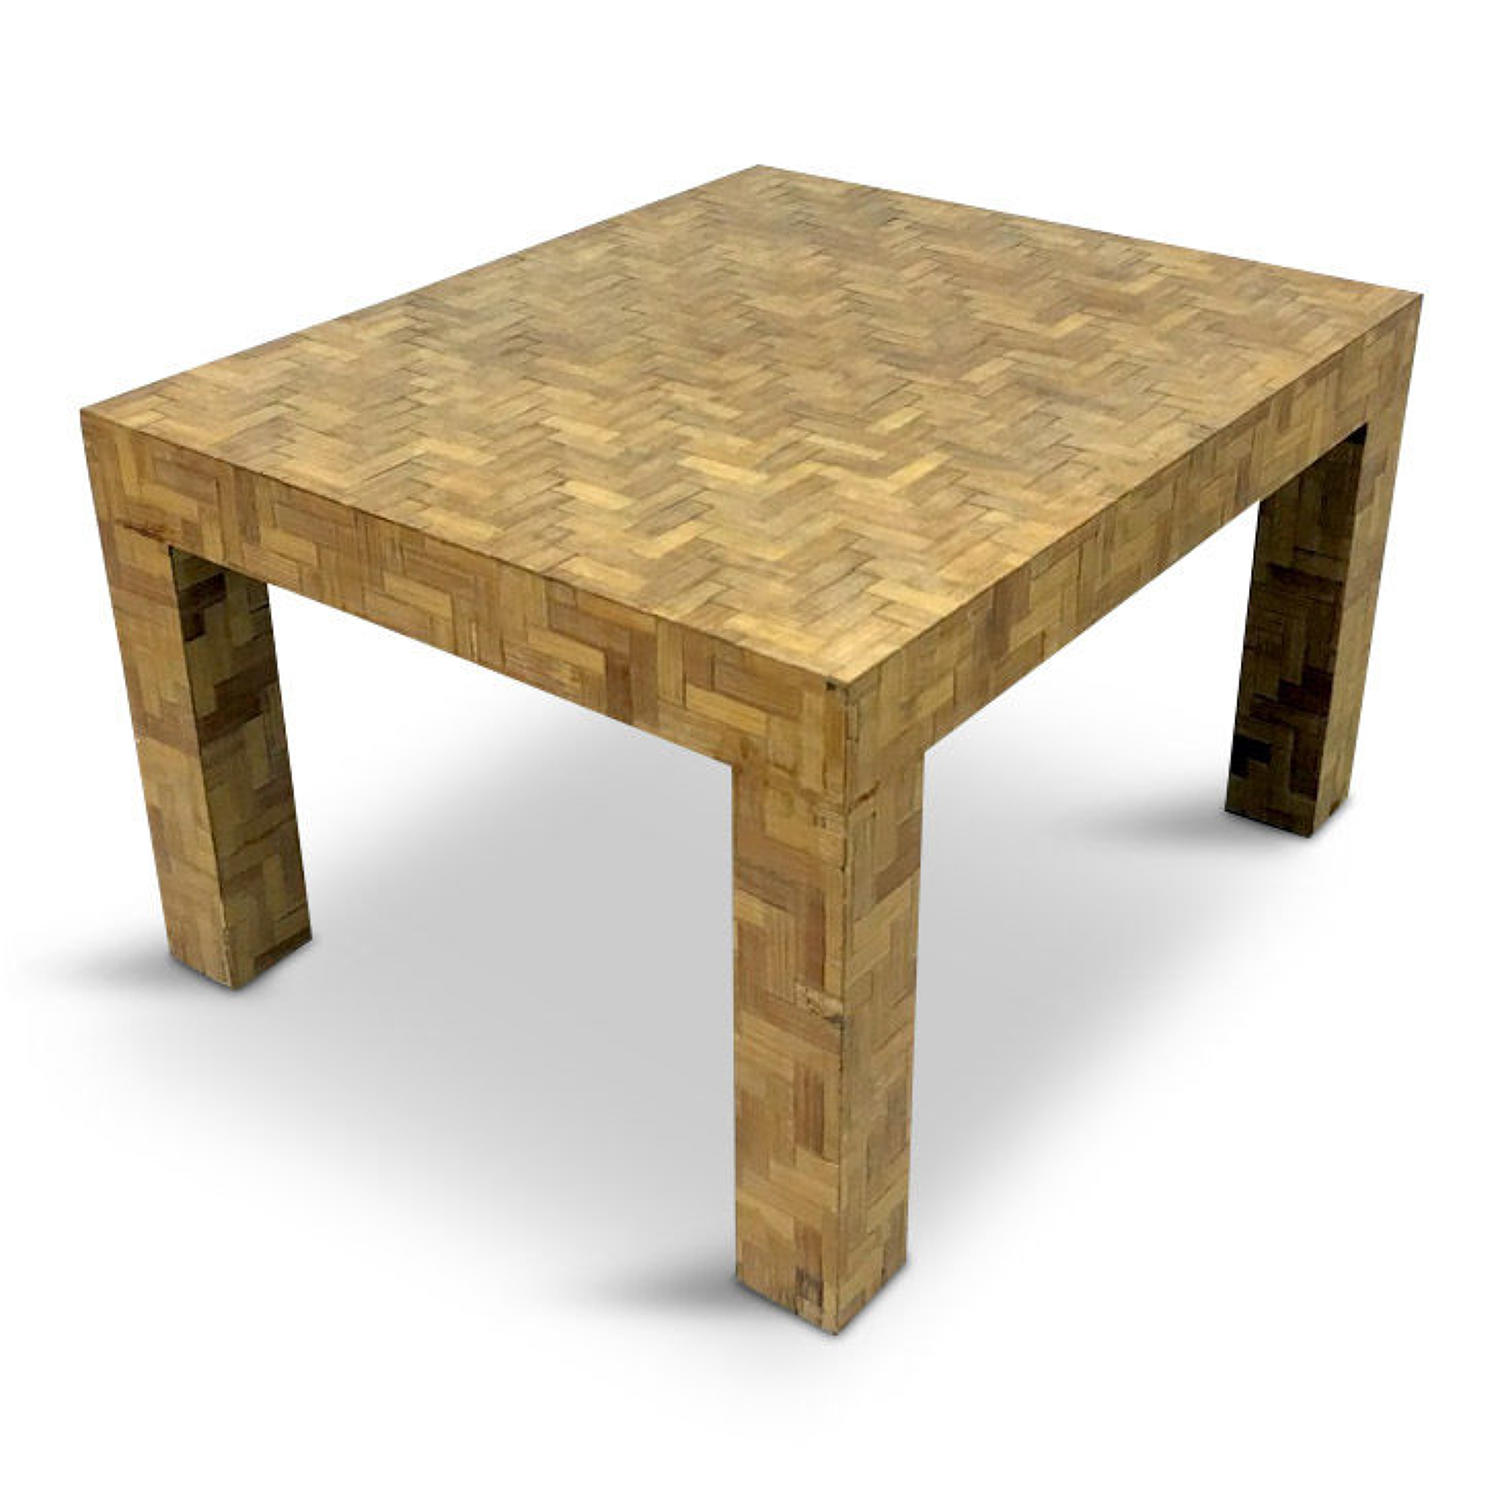 1970s Italian patchwork bamboo coffee table